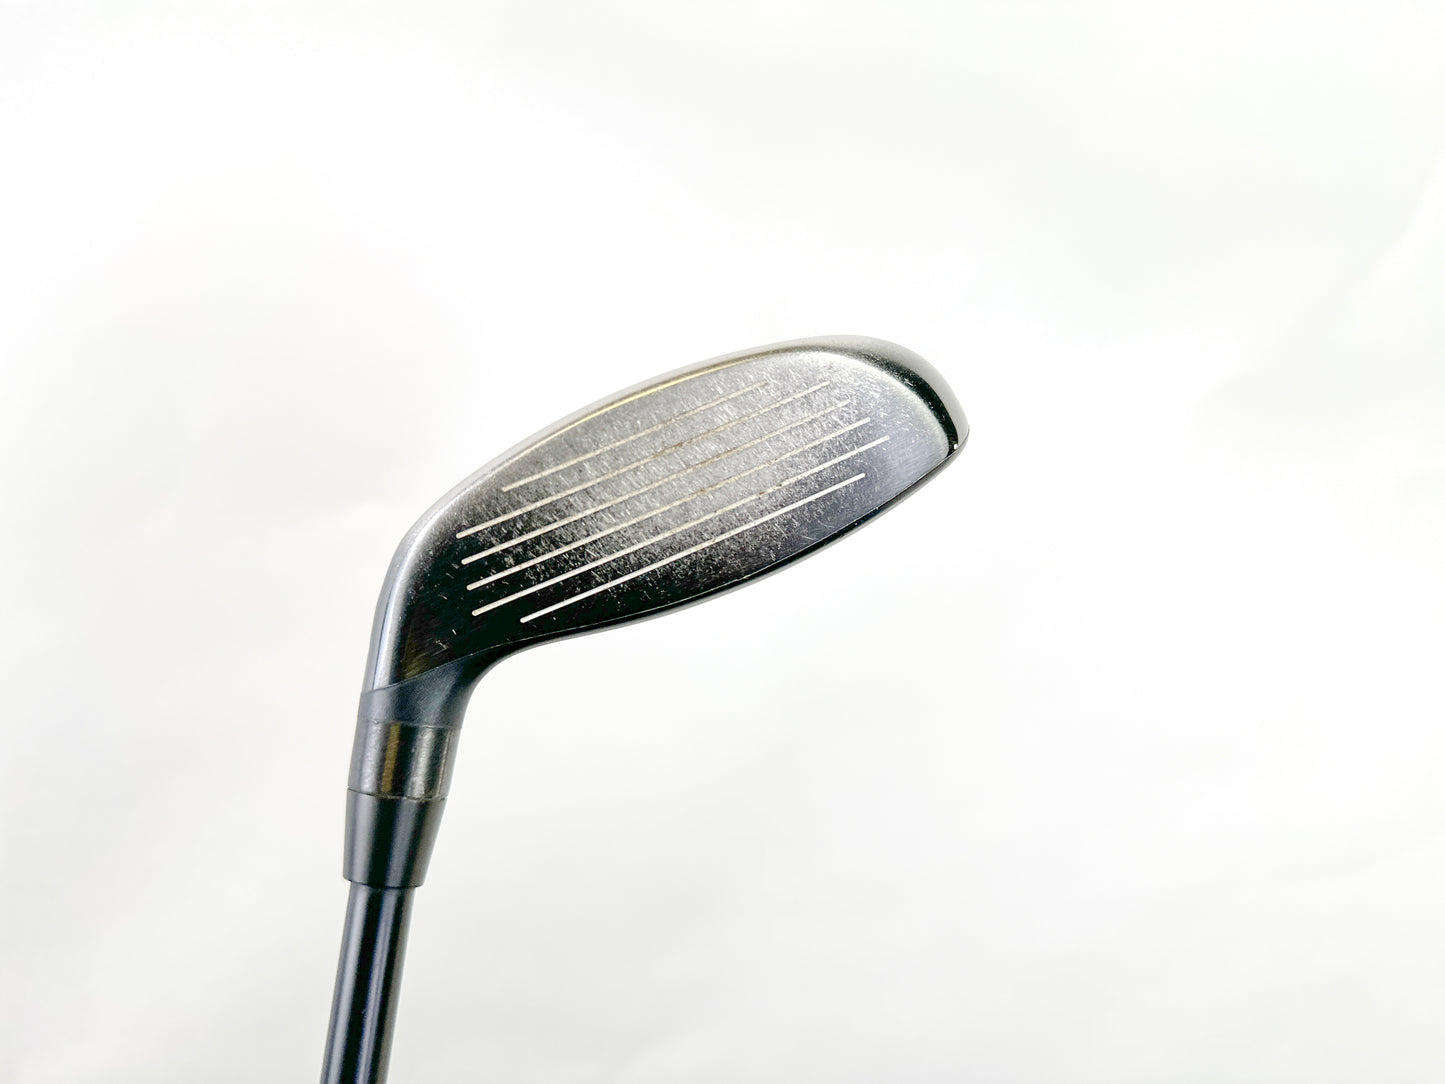 Used PXG 0317X 4H Hybrid - Right-Handed - 22 Degrees - Ladies Flex-Next Round